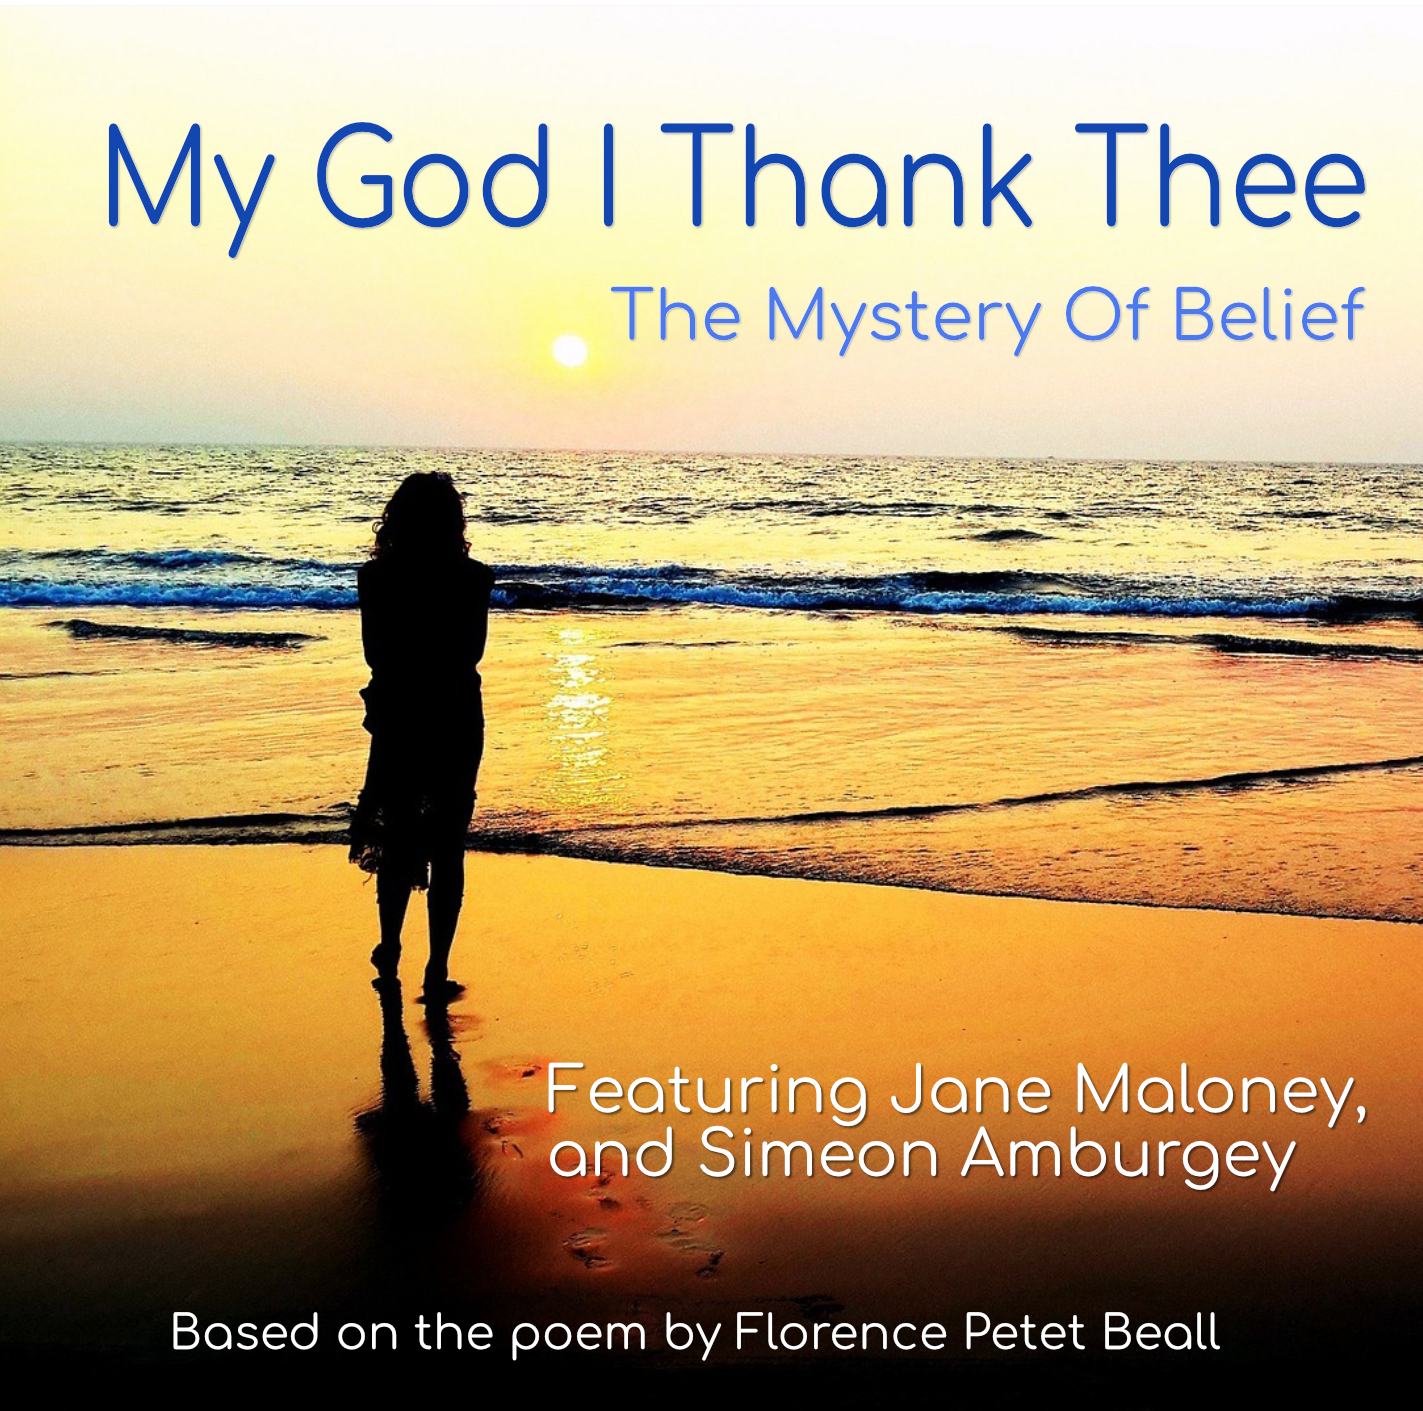 My God I Thank Thee (The Mystery Of Belief)